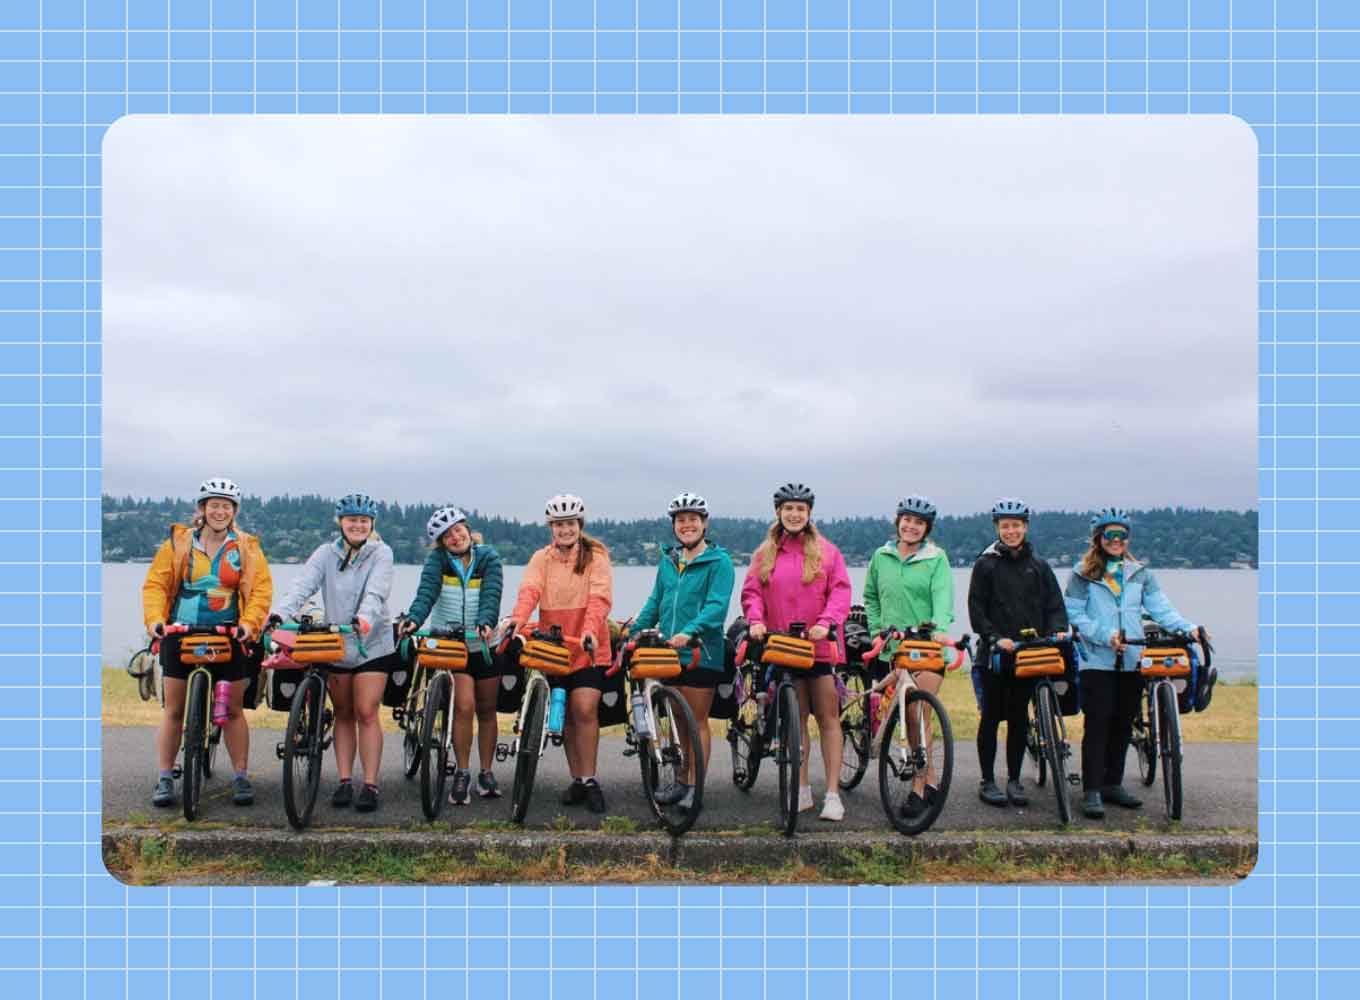 Nine young women stand next to their bicycles, cloudy skies and a body of water behind them.